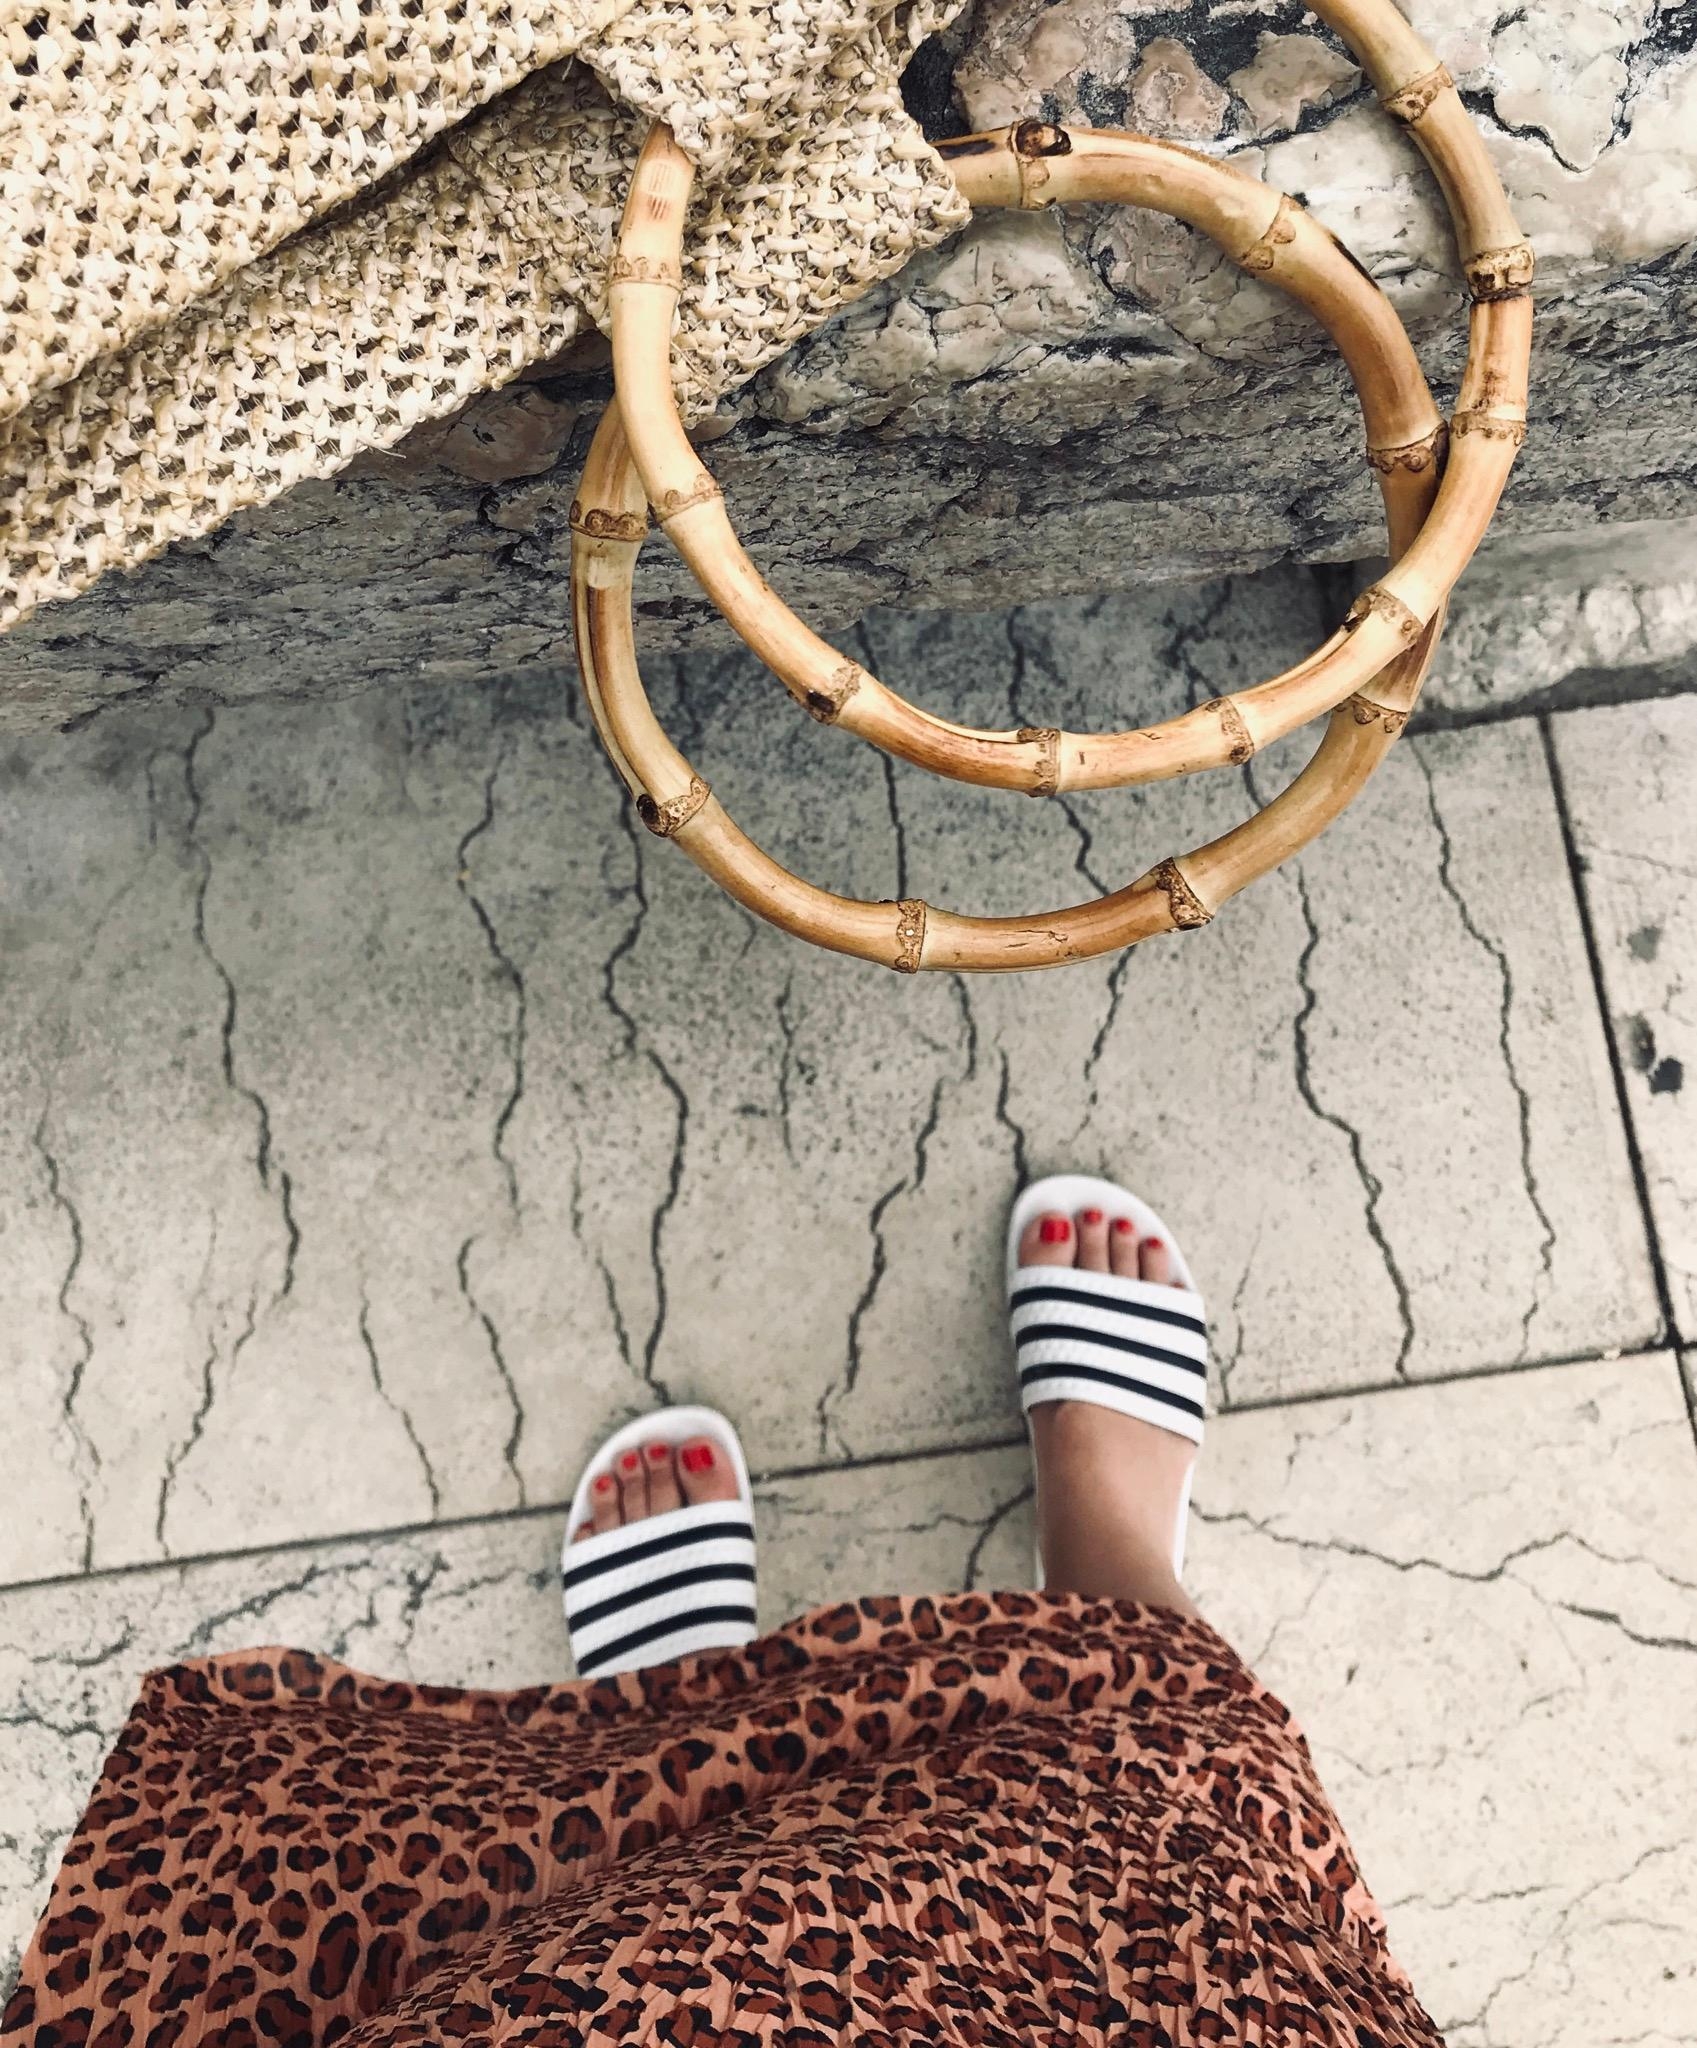 Vacay Vibes. 🖤
#ootd #summerdress #adiletten #leo #tasche #outfit #fashion #sommer #taschenliebe #leoprint